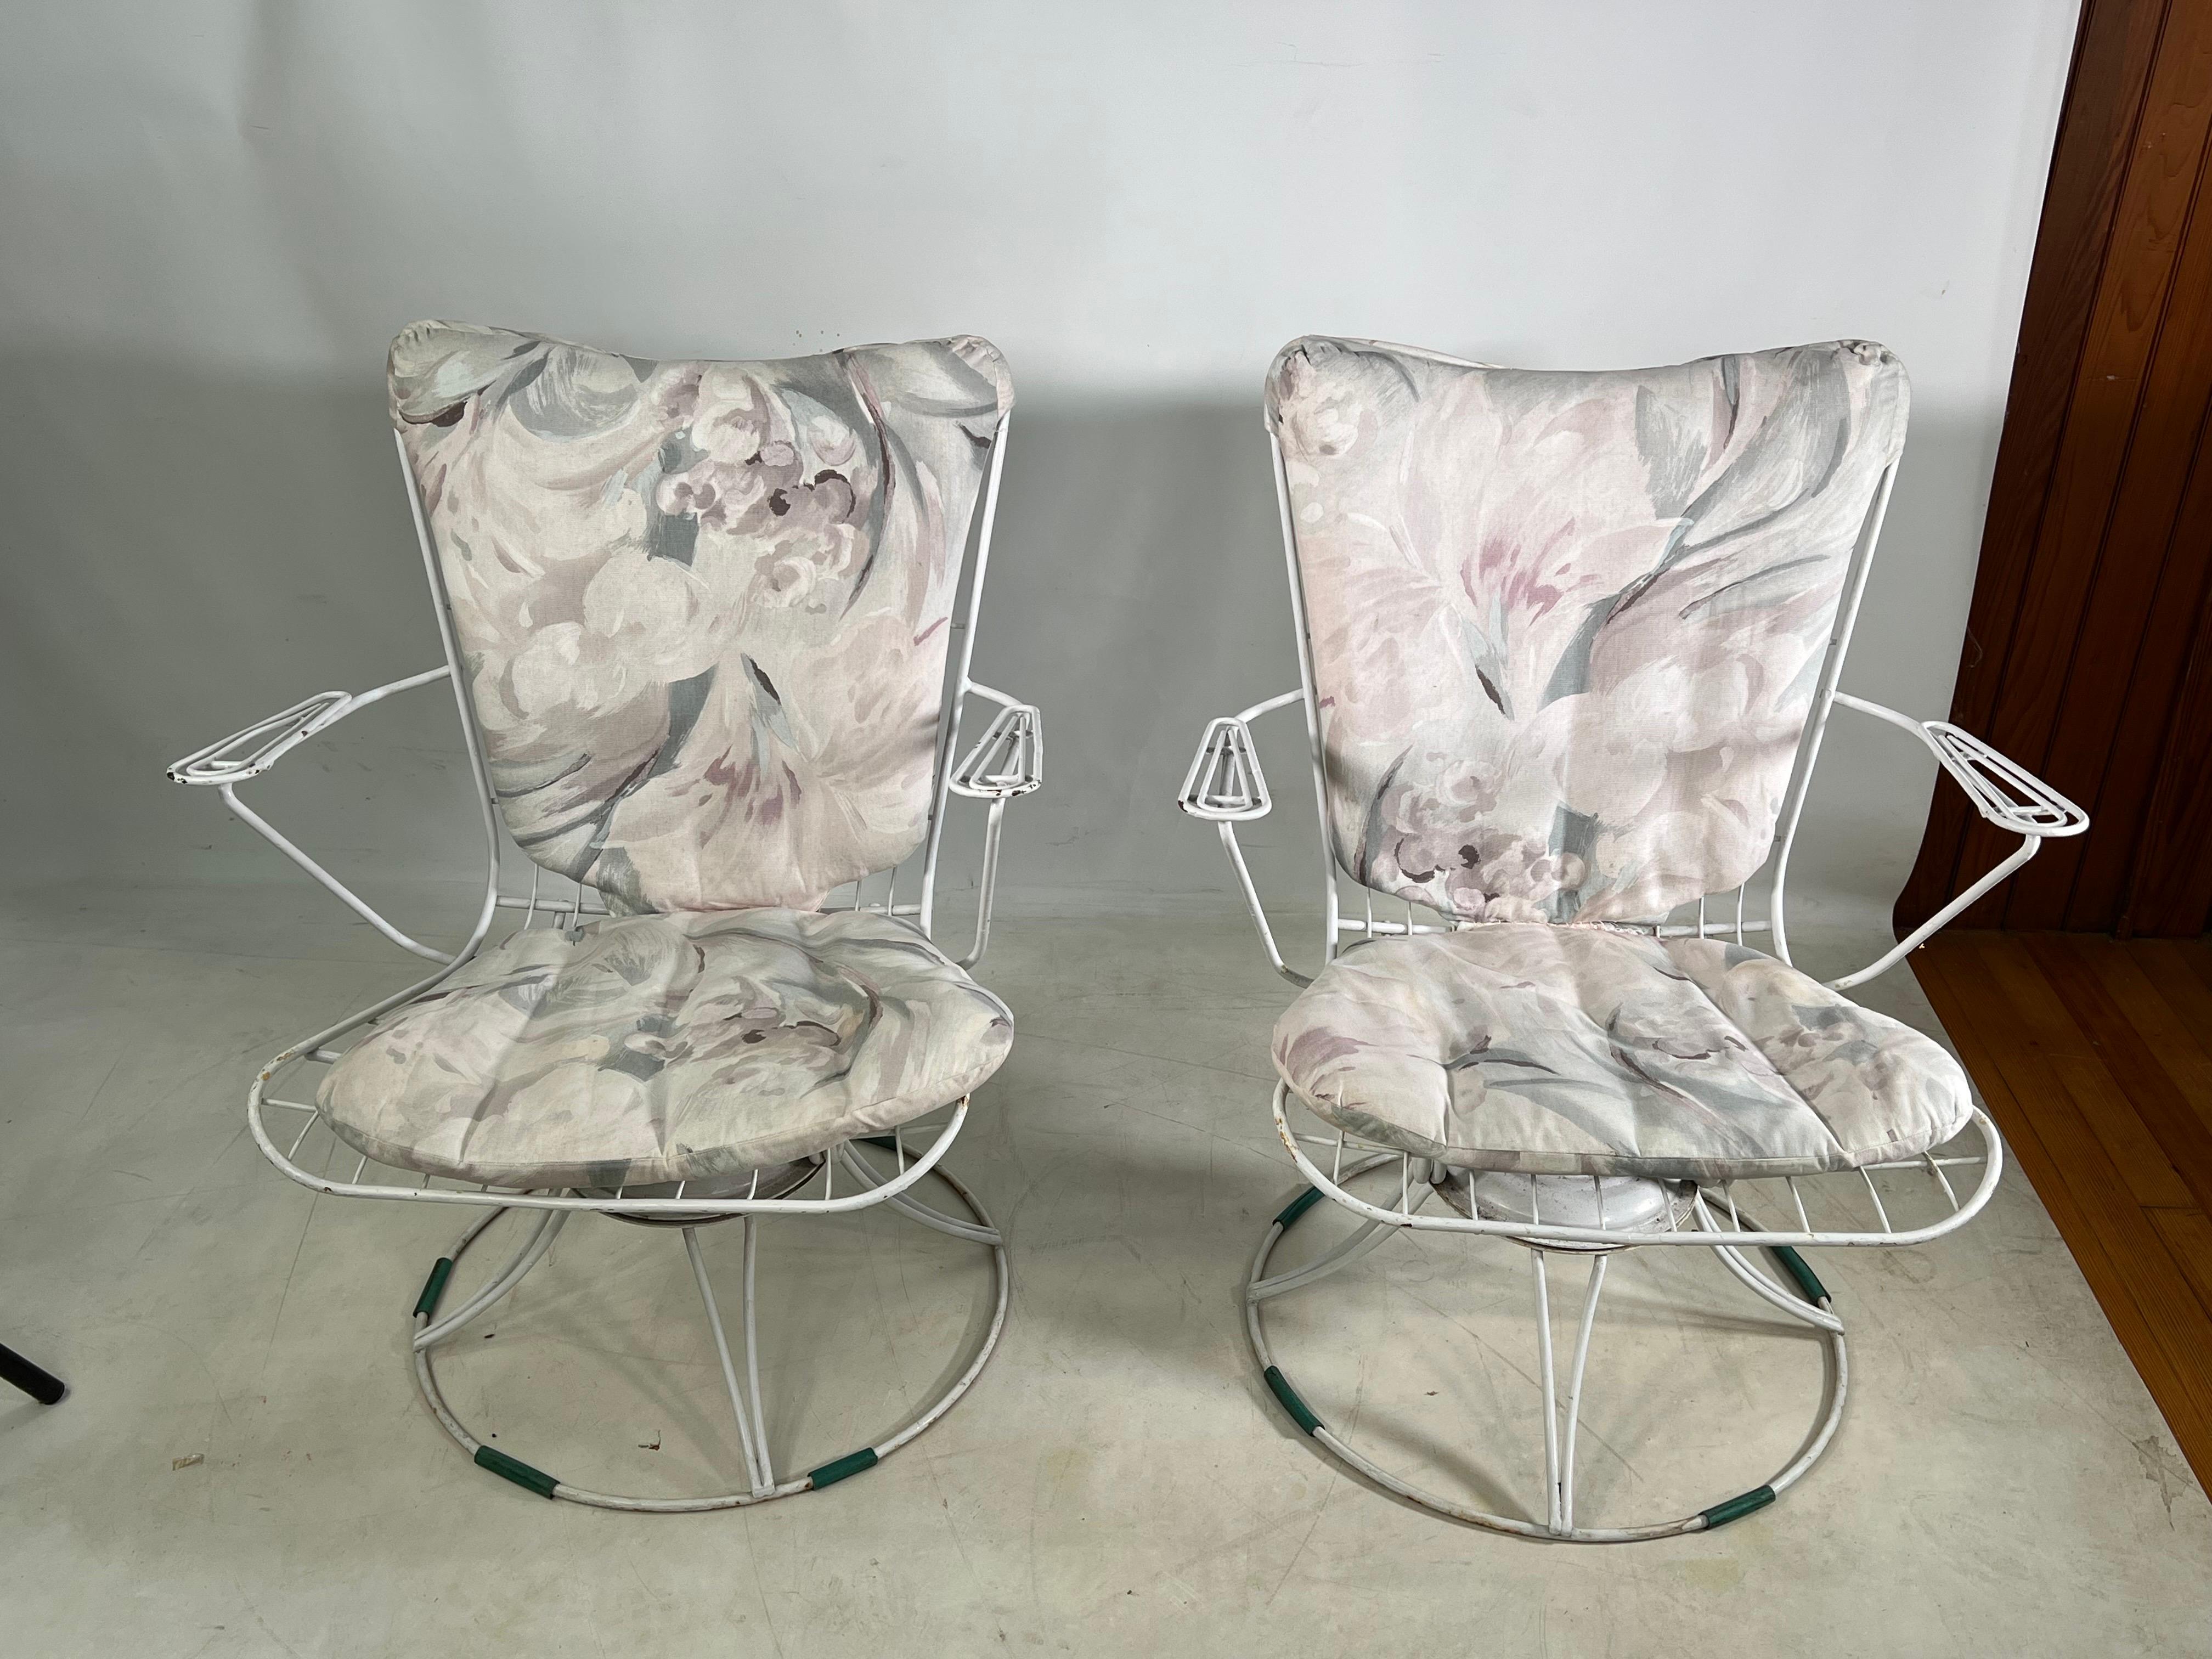 Great set of original homecrest wire chairs, the chairs are made out of CastIron and come with two cushions.